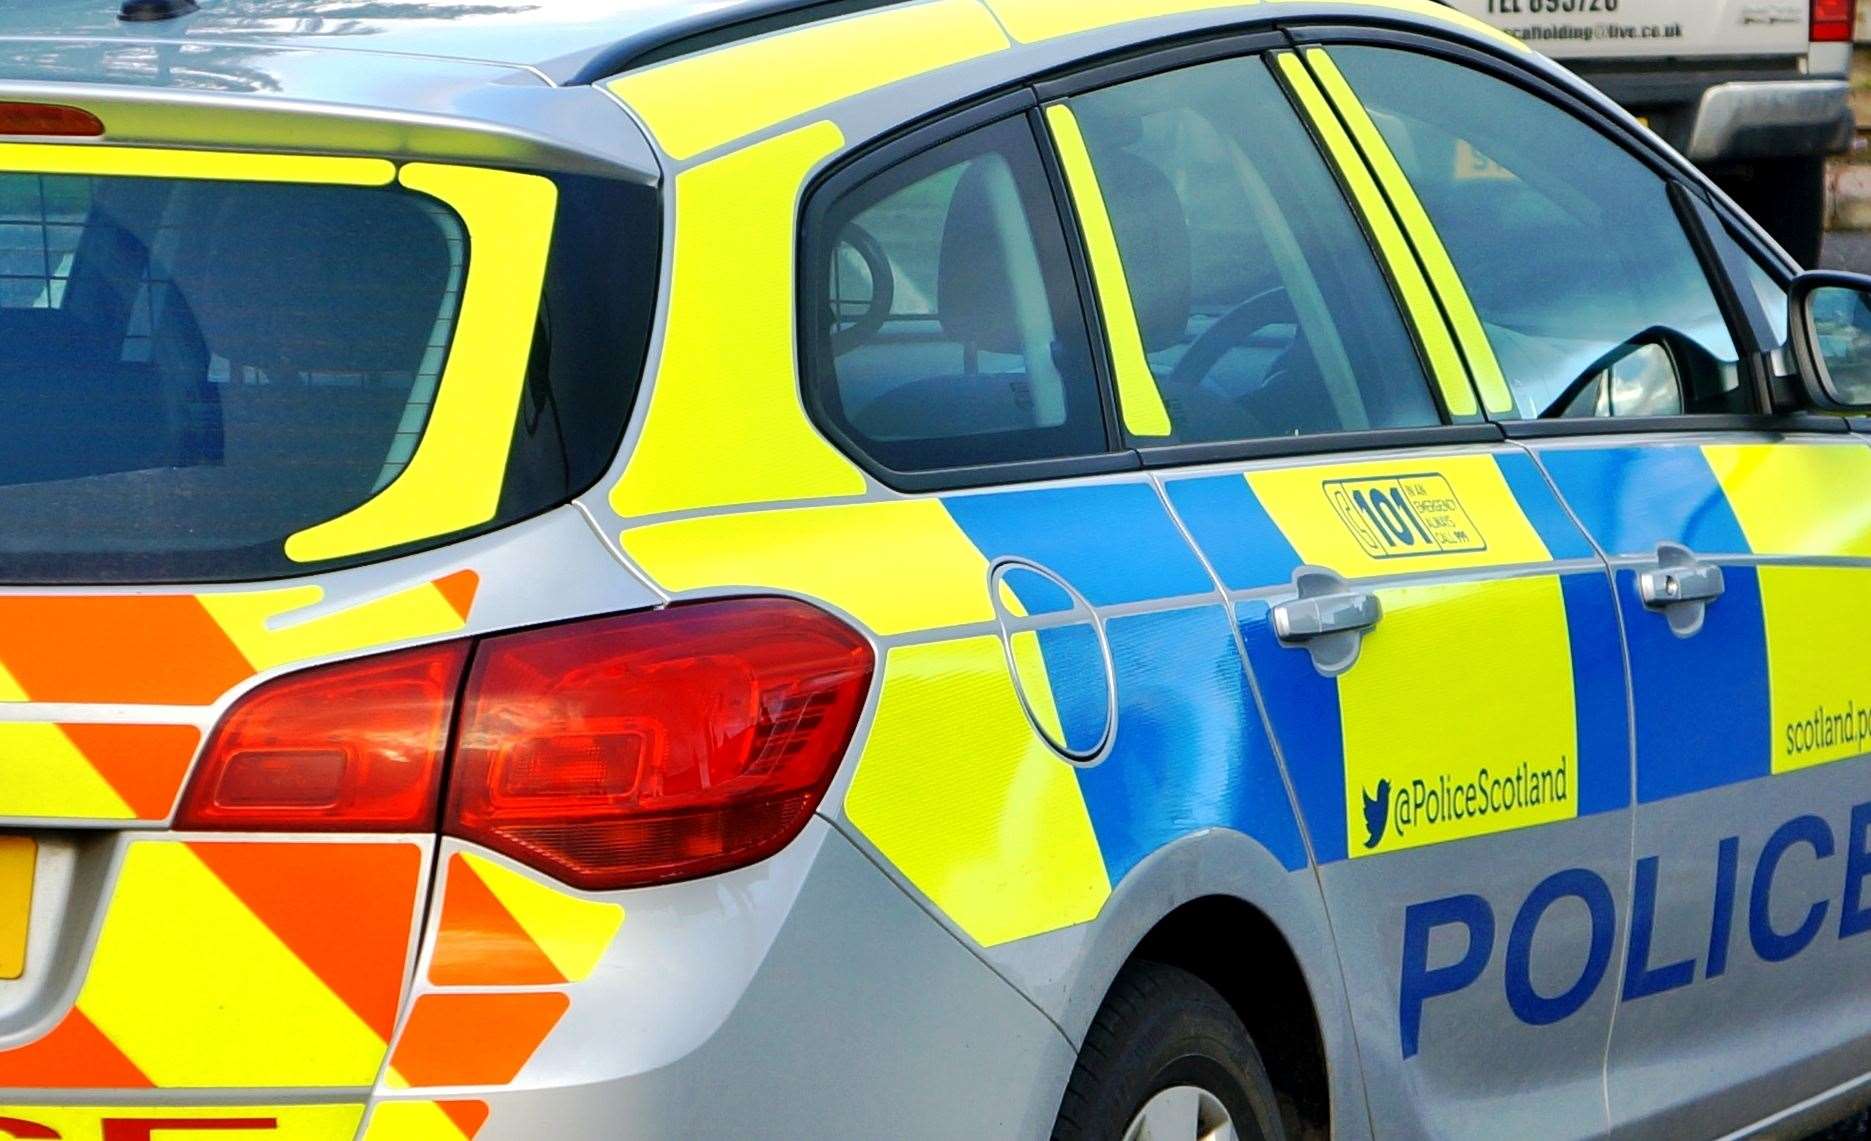 A 42-year-old woman has died following a serious accident on the A9 last night.